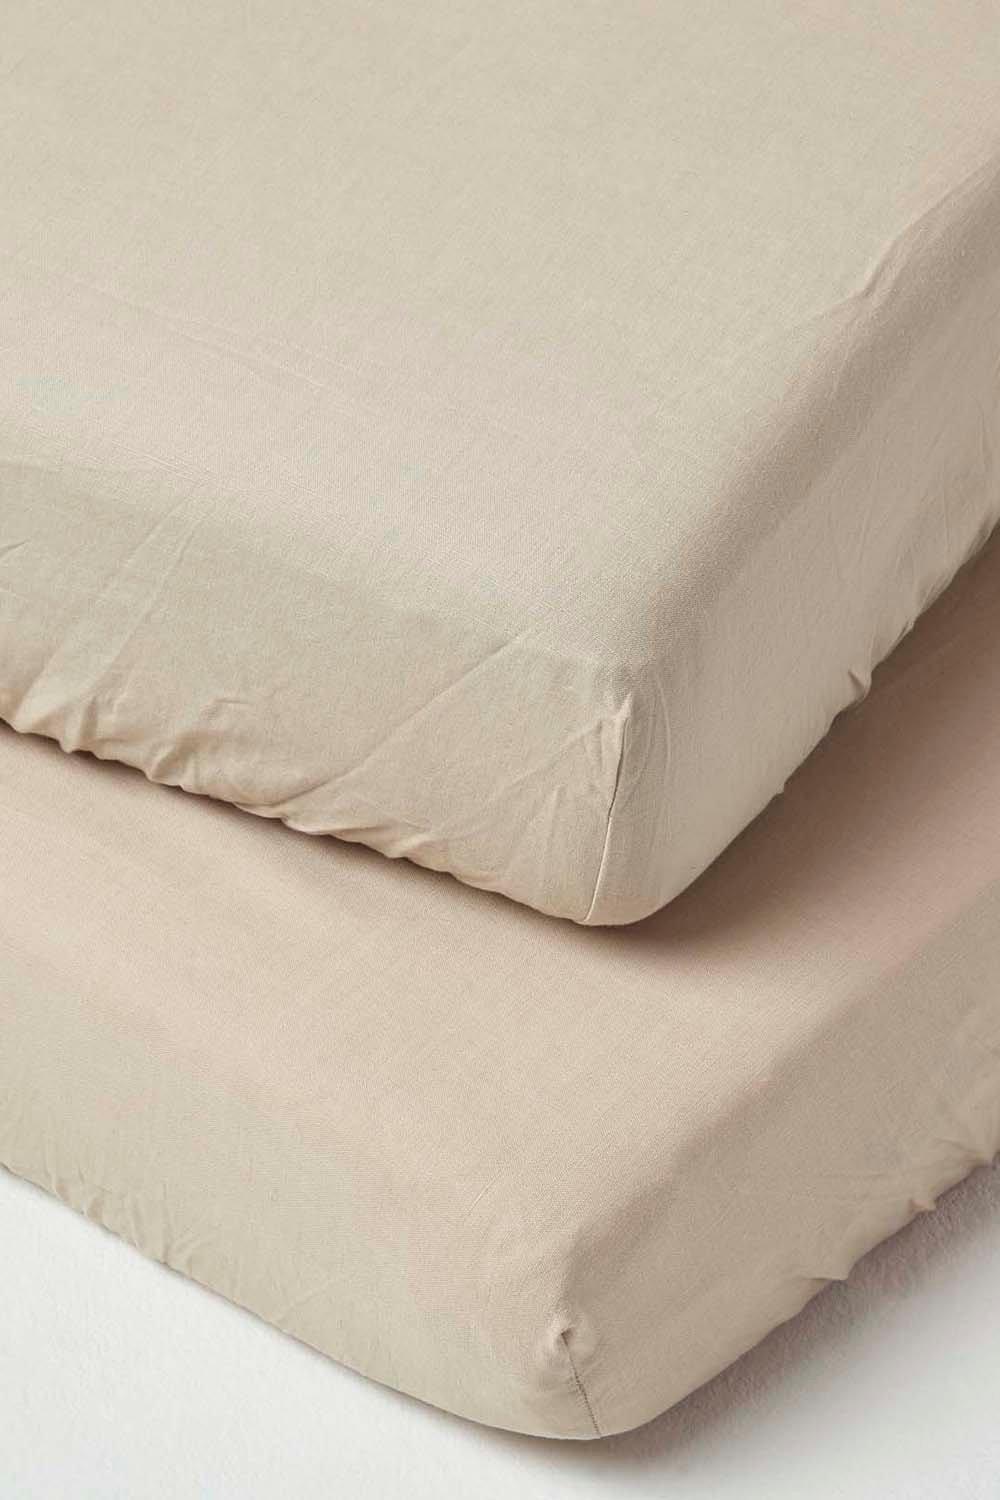 Homescapes Soft Linen Fitted Cot Sheet, Pack of 2|Size: Cot Bed|natural